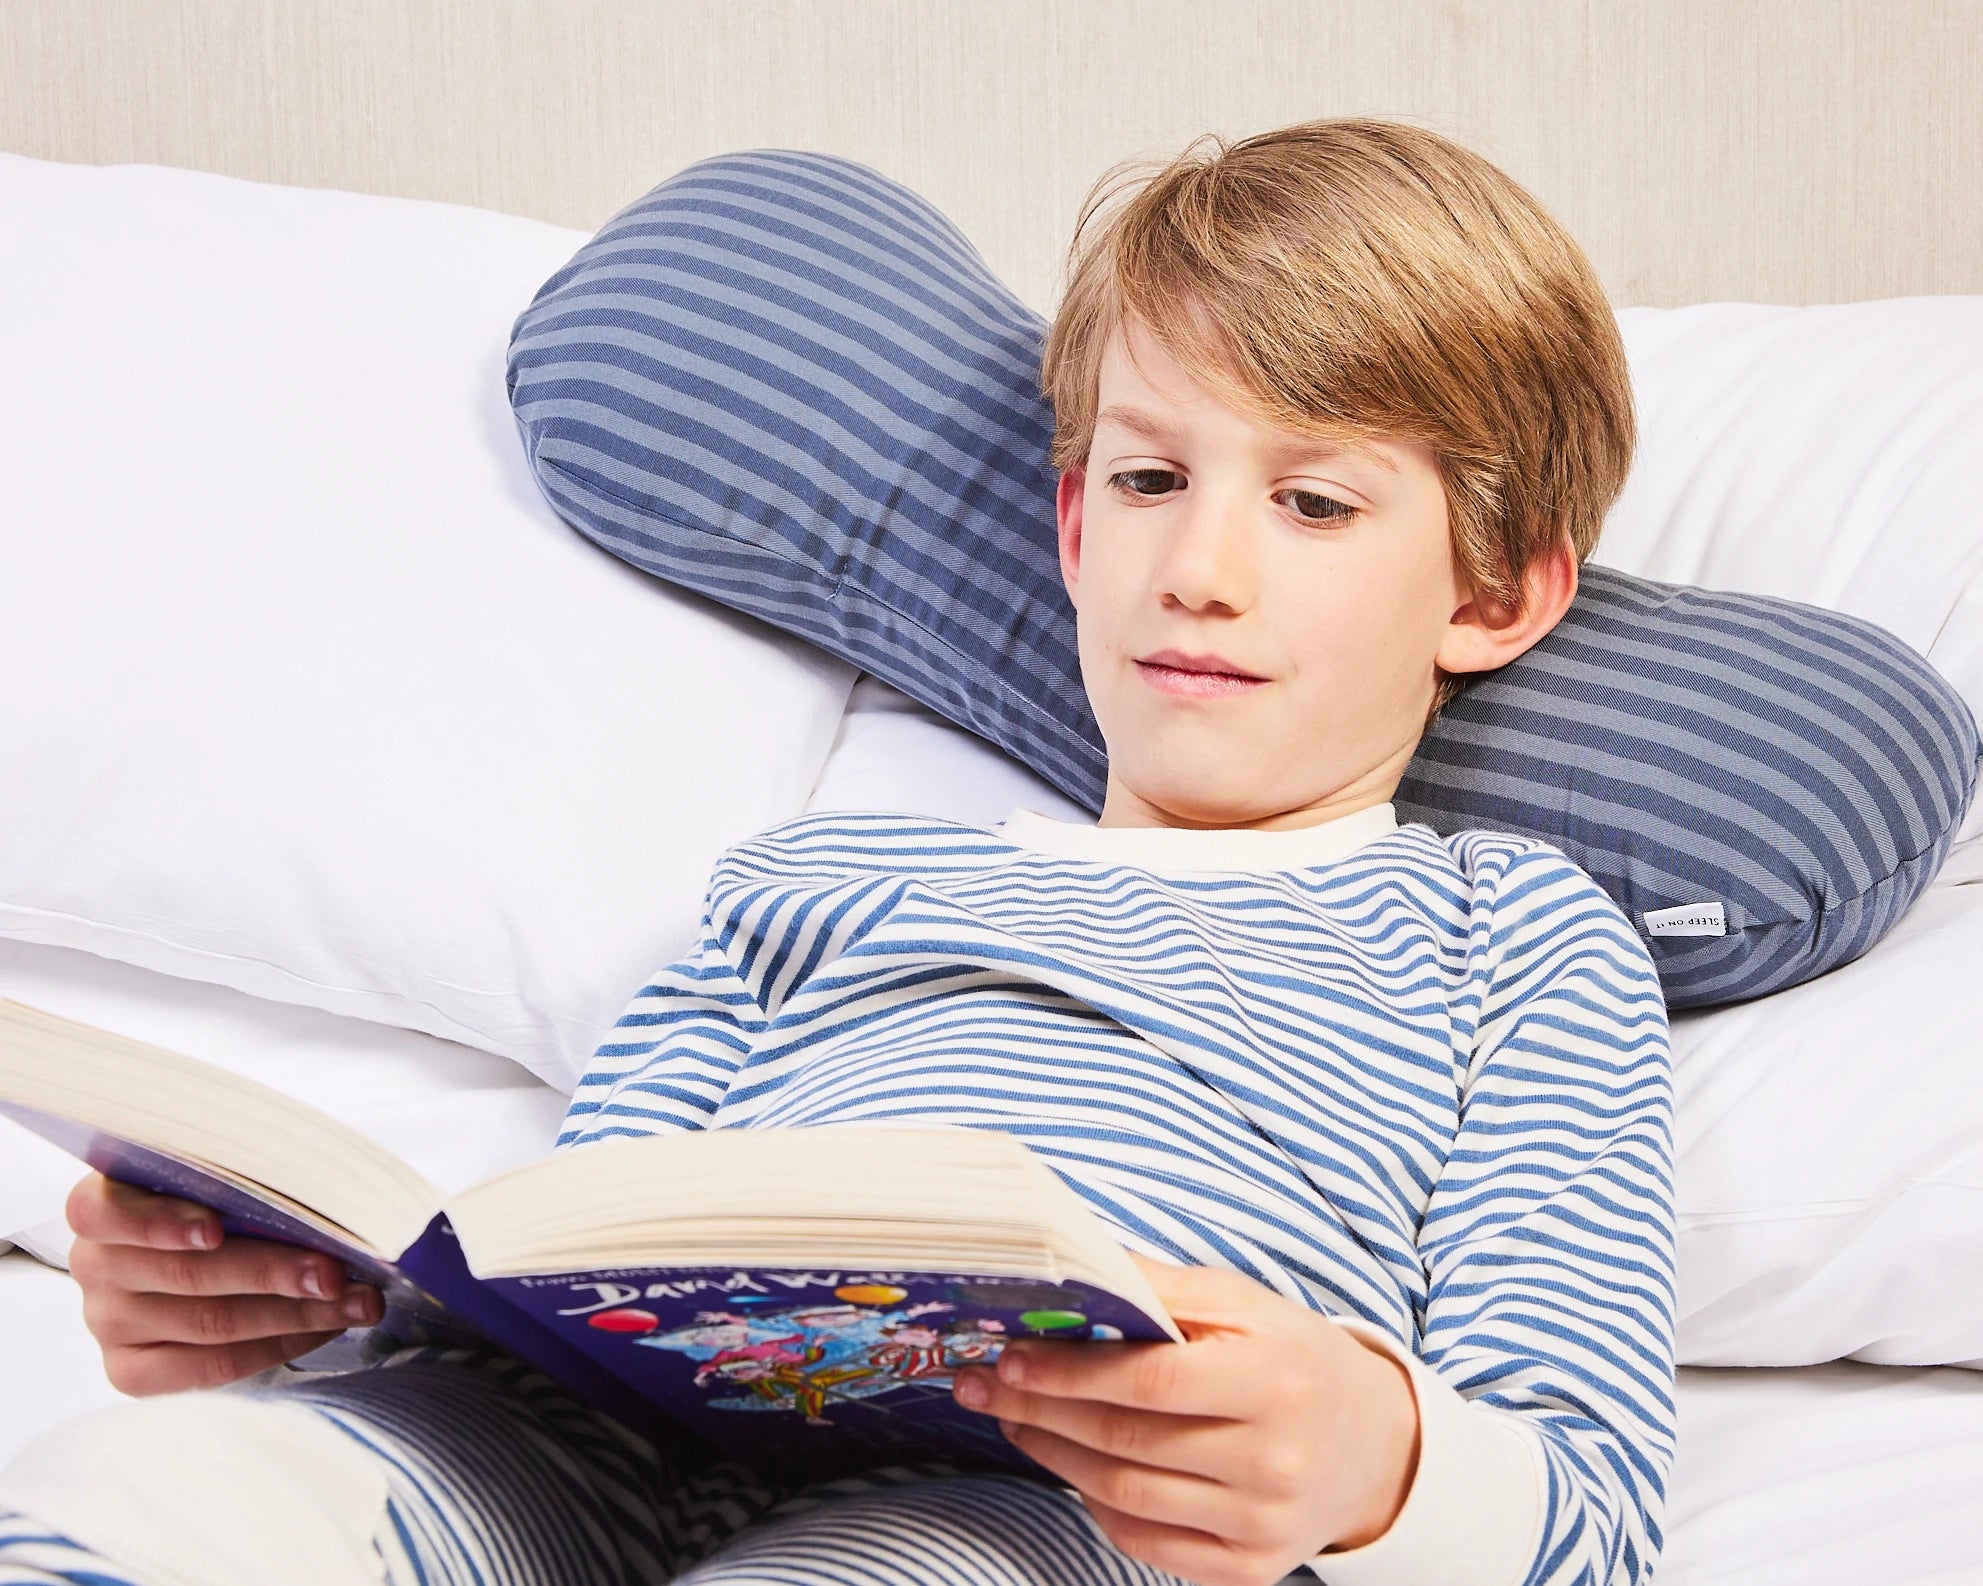 Young boy using short sleeping pillow to read with ease